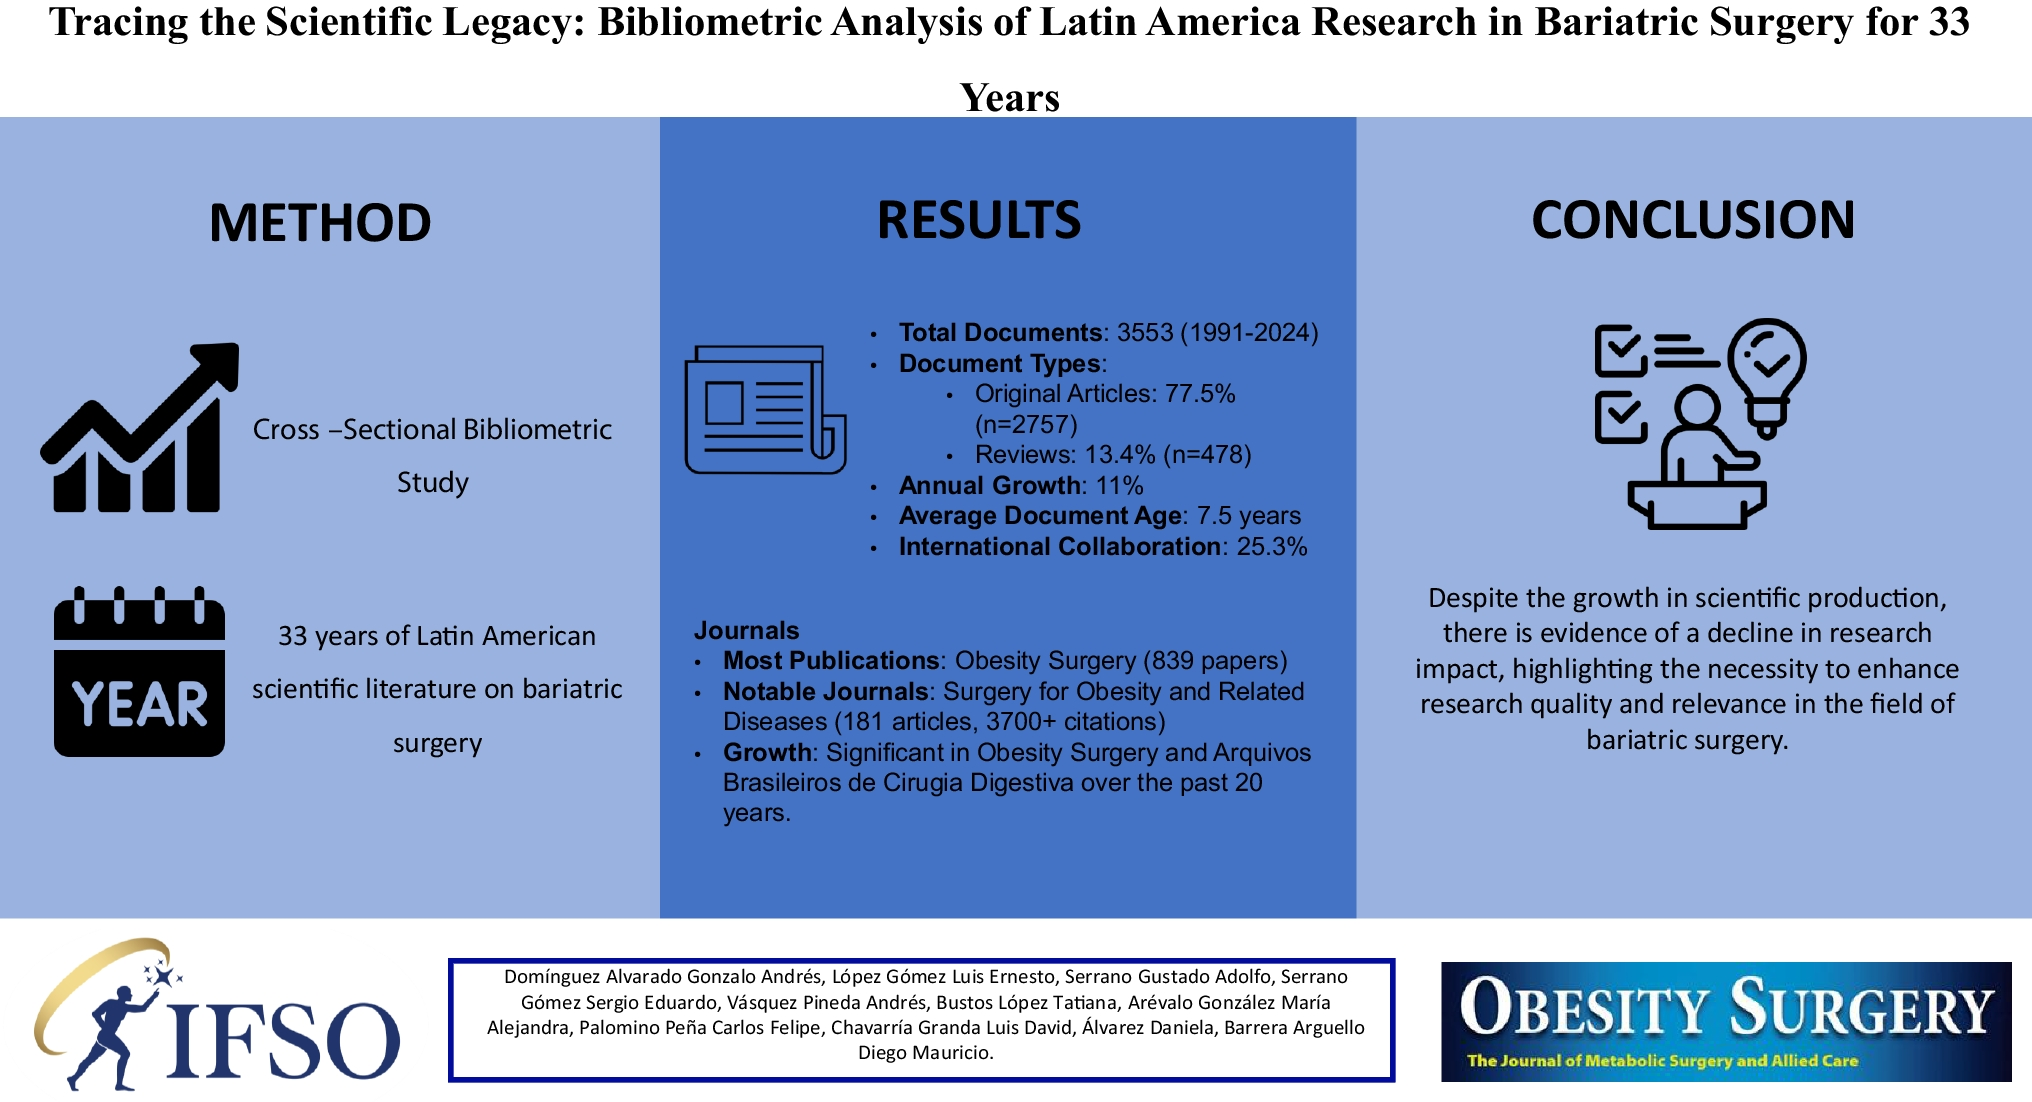 Tracing the Scientific Legacy: Bibliometric Analysis of LATAM Research in Bariatric Surgery for 33 Years